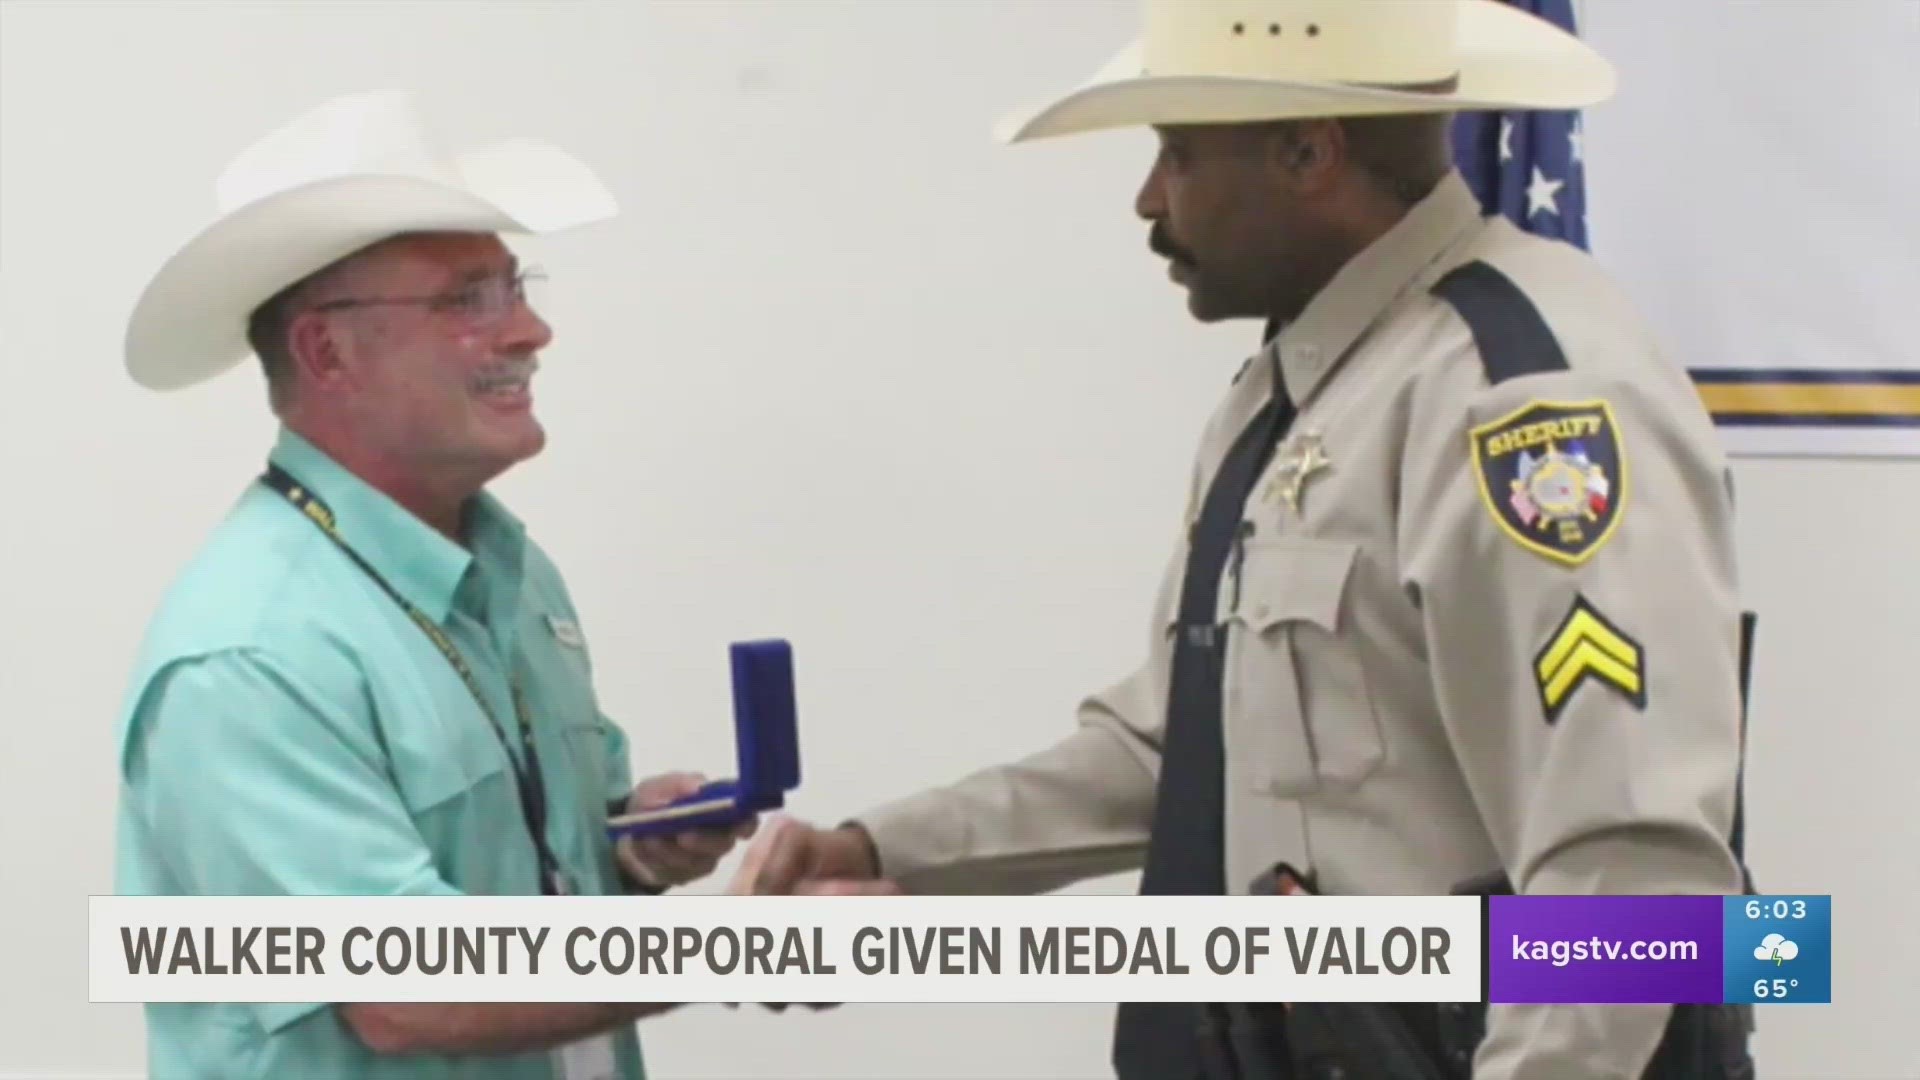 On Feb. 24, Corporal Sylvester Glaze assisted in a rescue from a residence on fire in Walker County. He was awarded the Medal of Valor for his efforts on April 19.